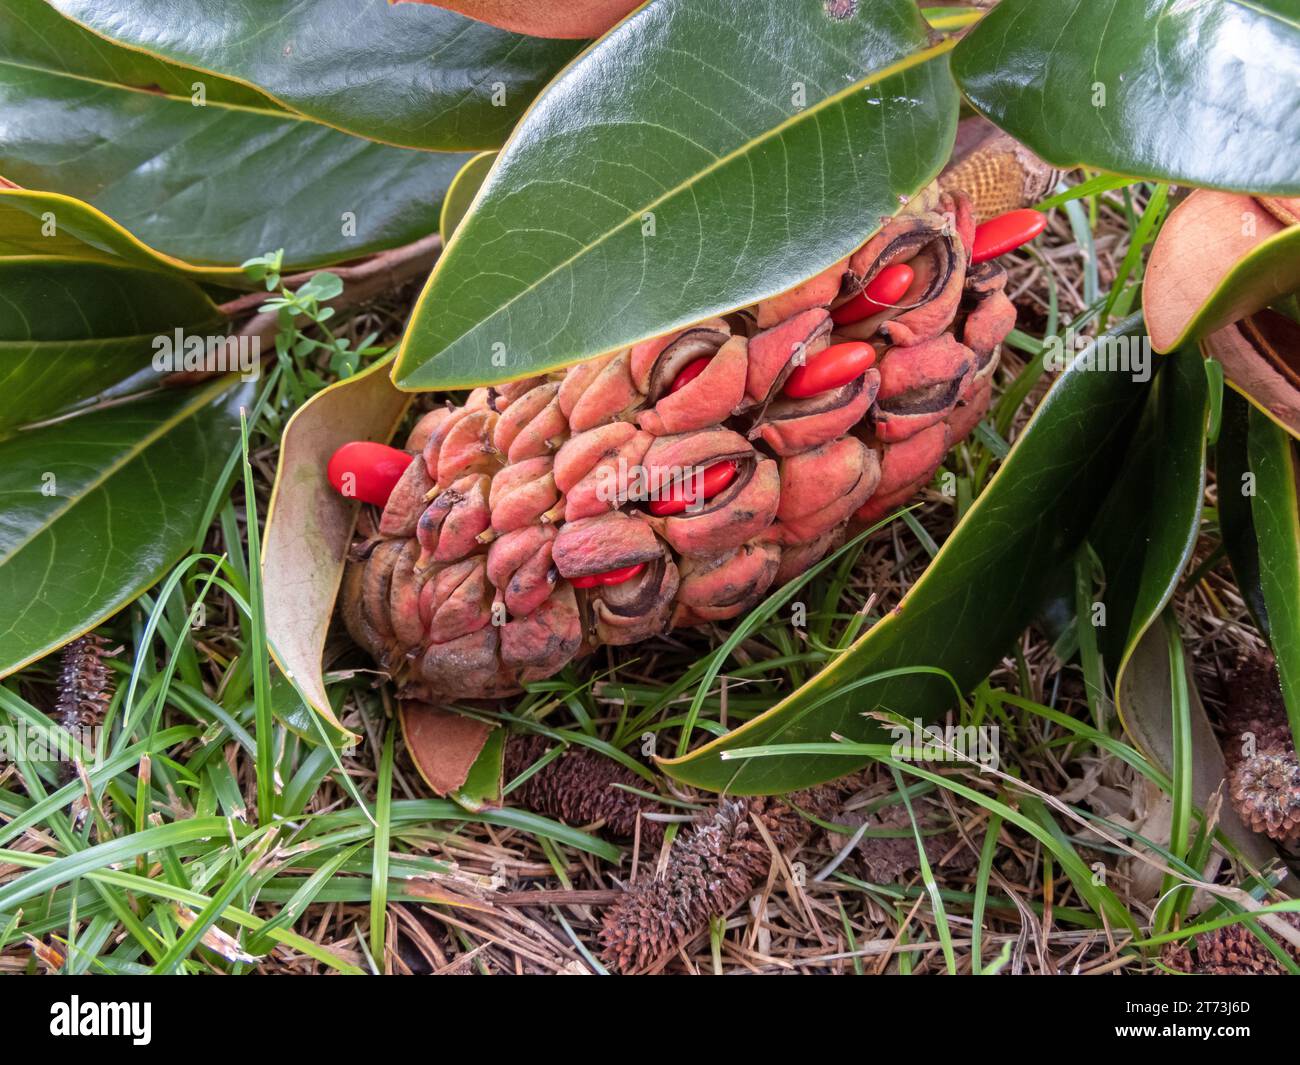 Magnolia grandiflora, southern magnolia or bull bay tree aggregate fruit with bright seeds. Stock Photo